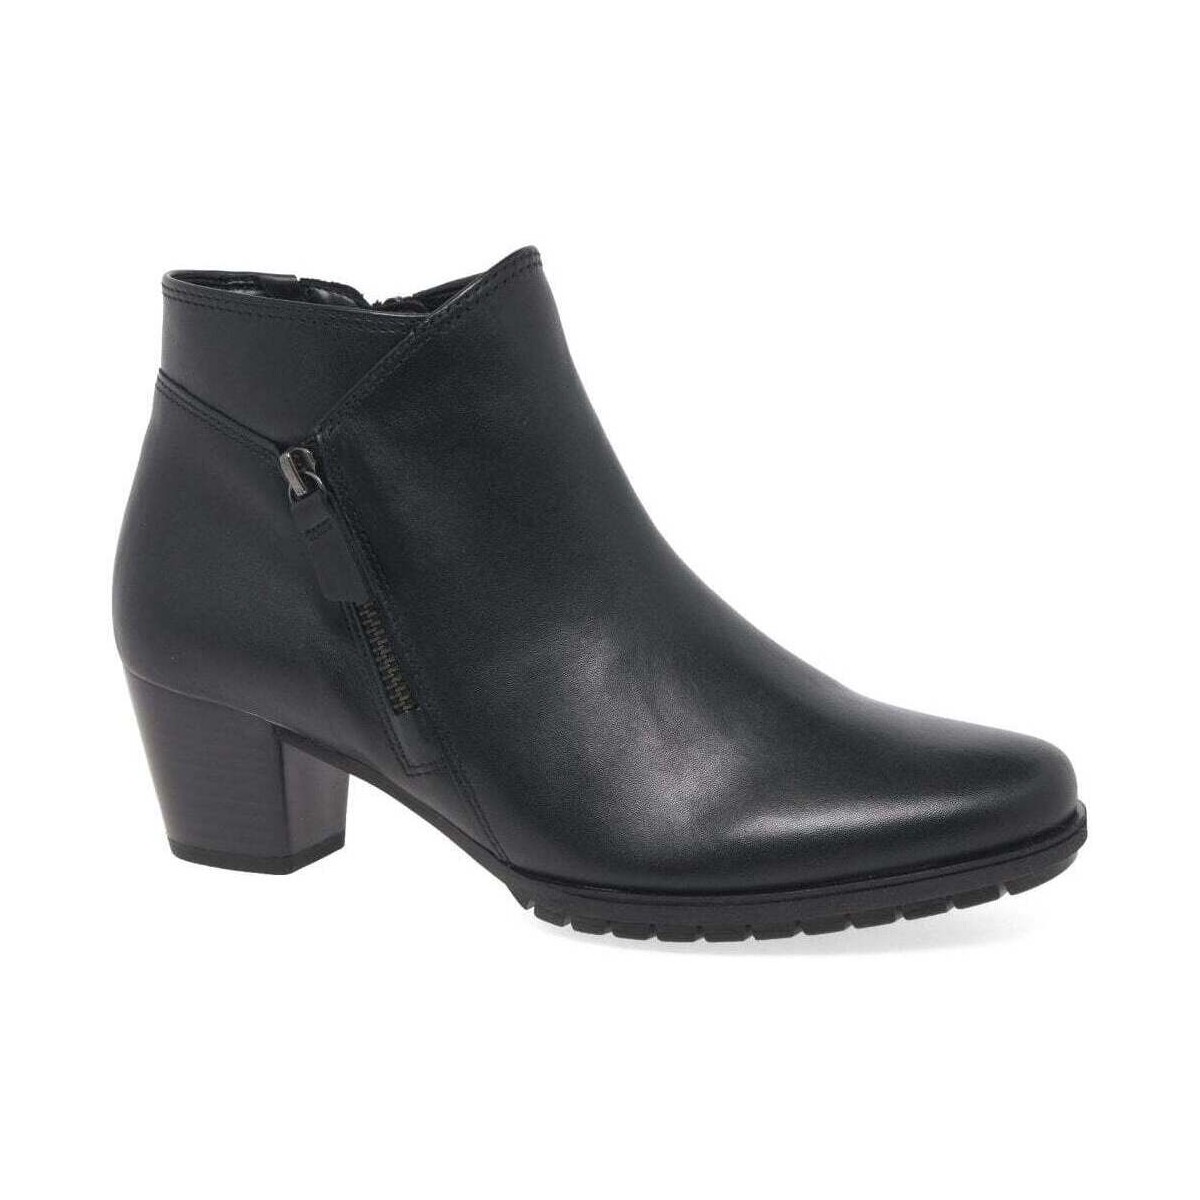 Shoes Women Boots Gabor Olivetti Womens Zip Fastening Ankle Boots Black